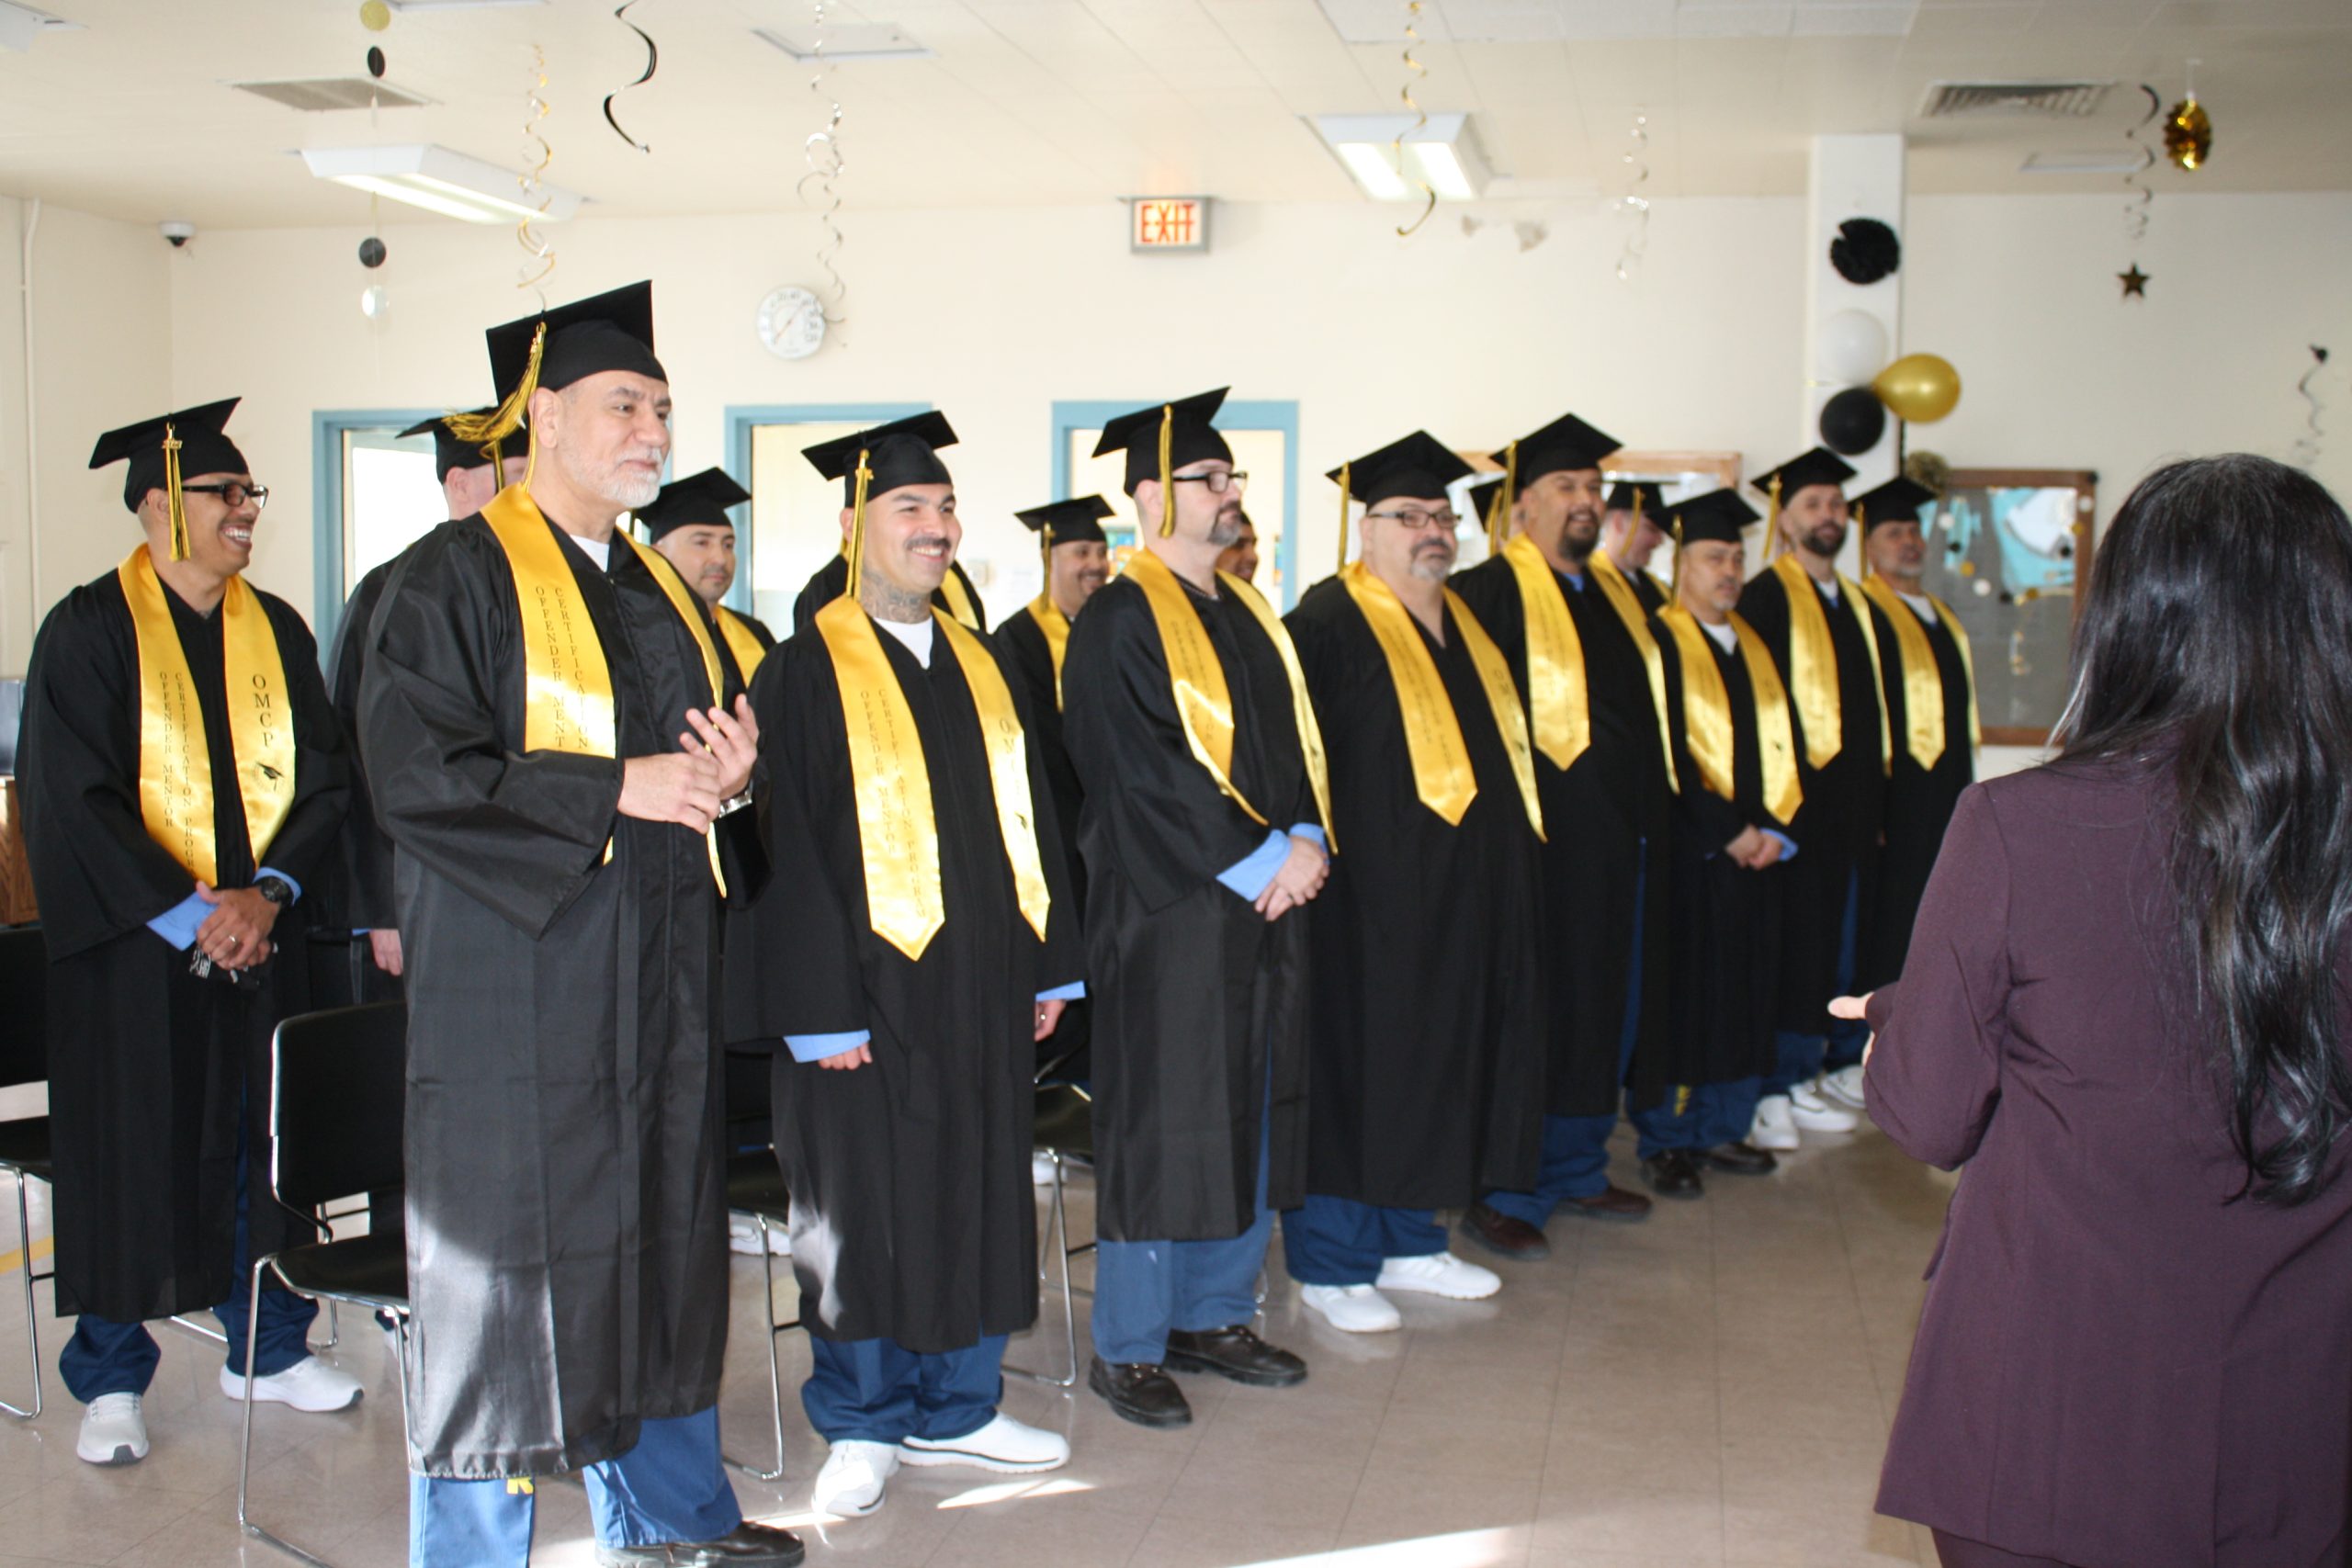 Offender Mentor Certification graduation with people wearing caps and gowns.